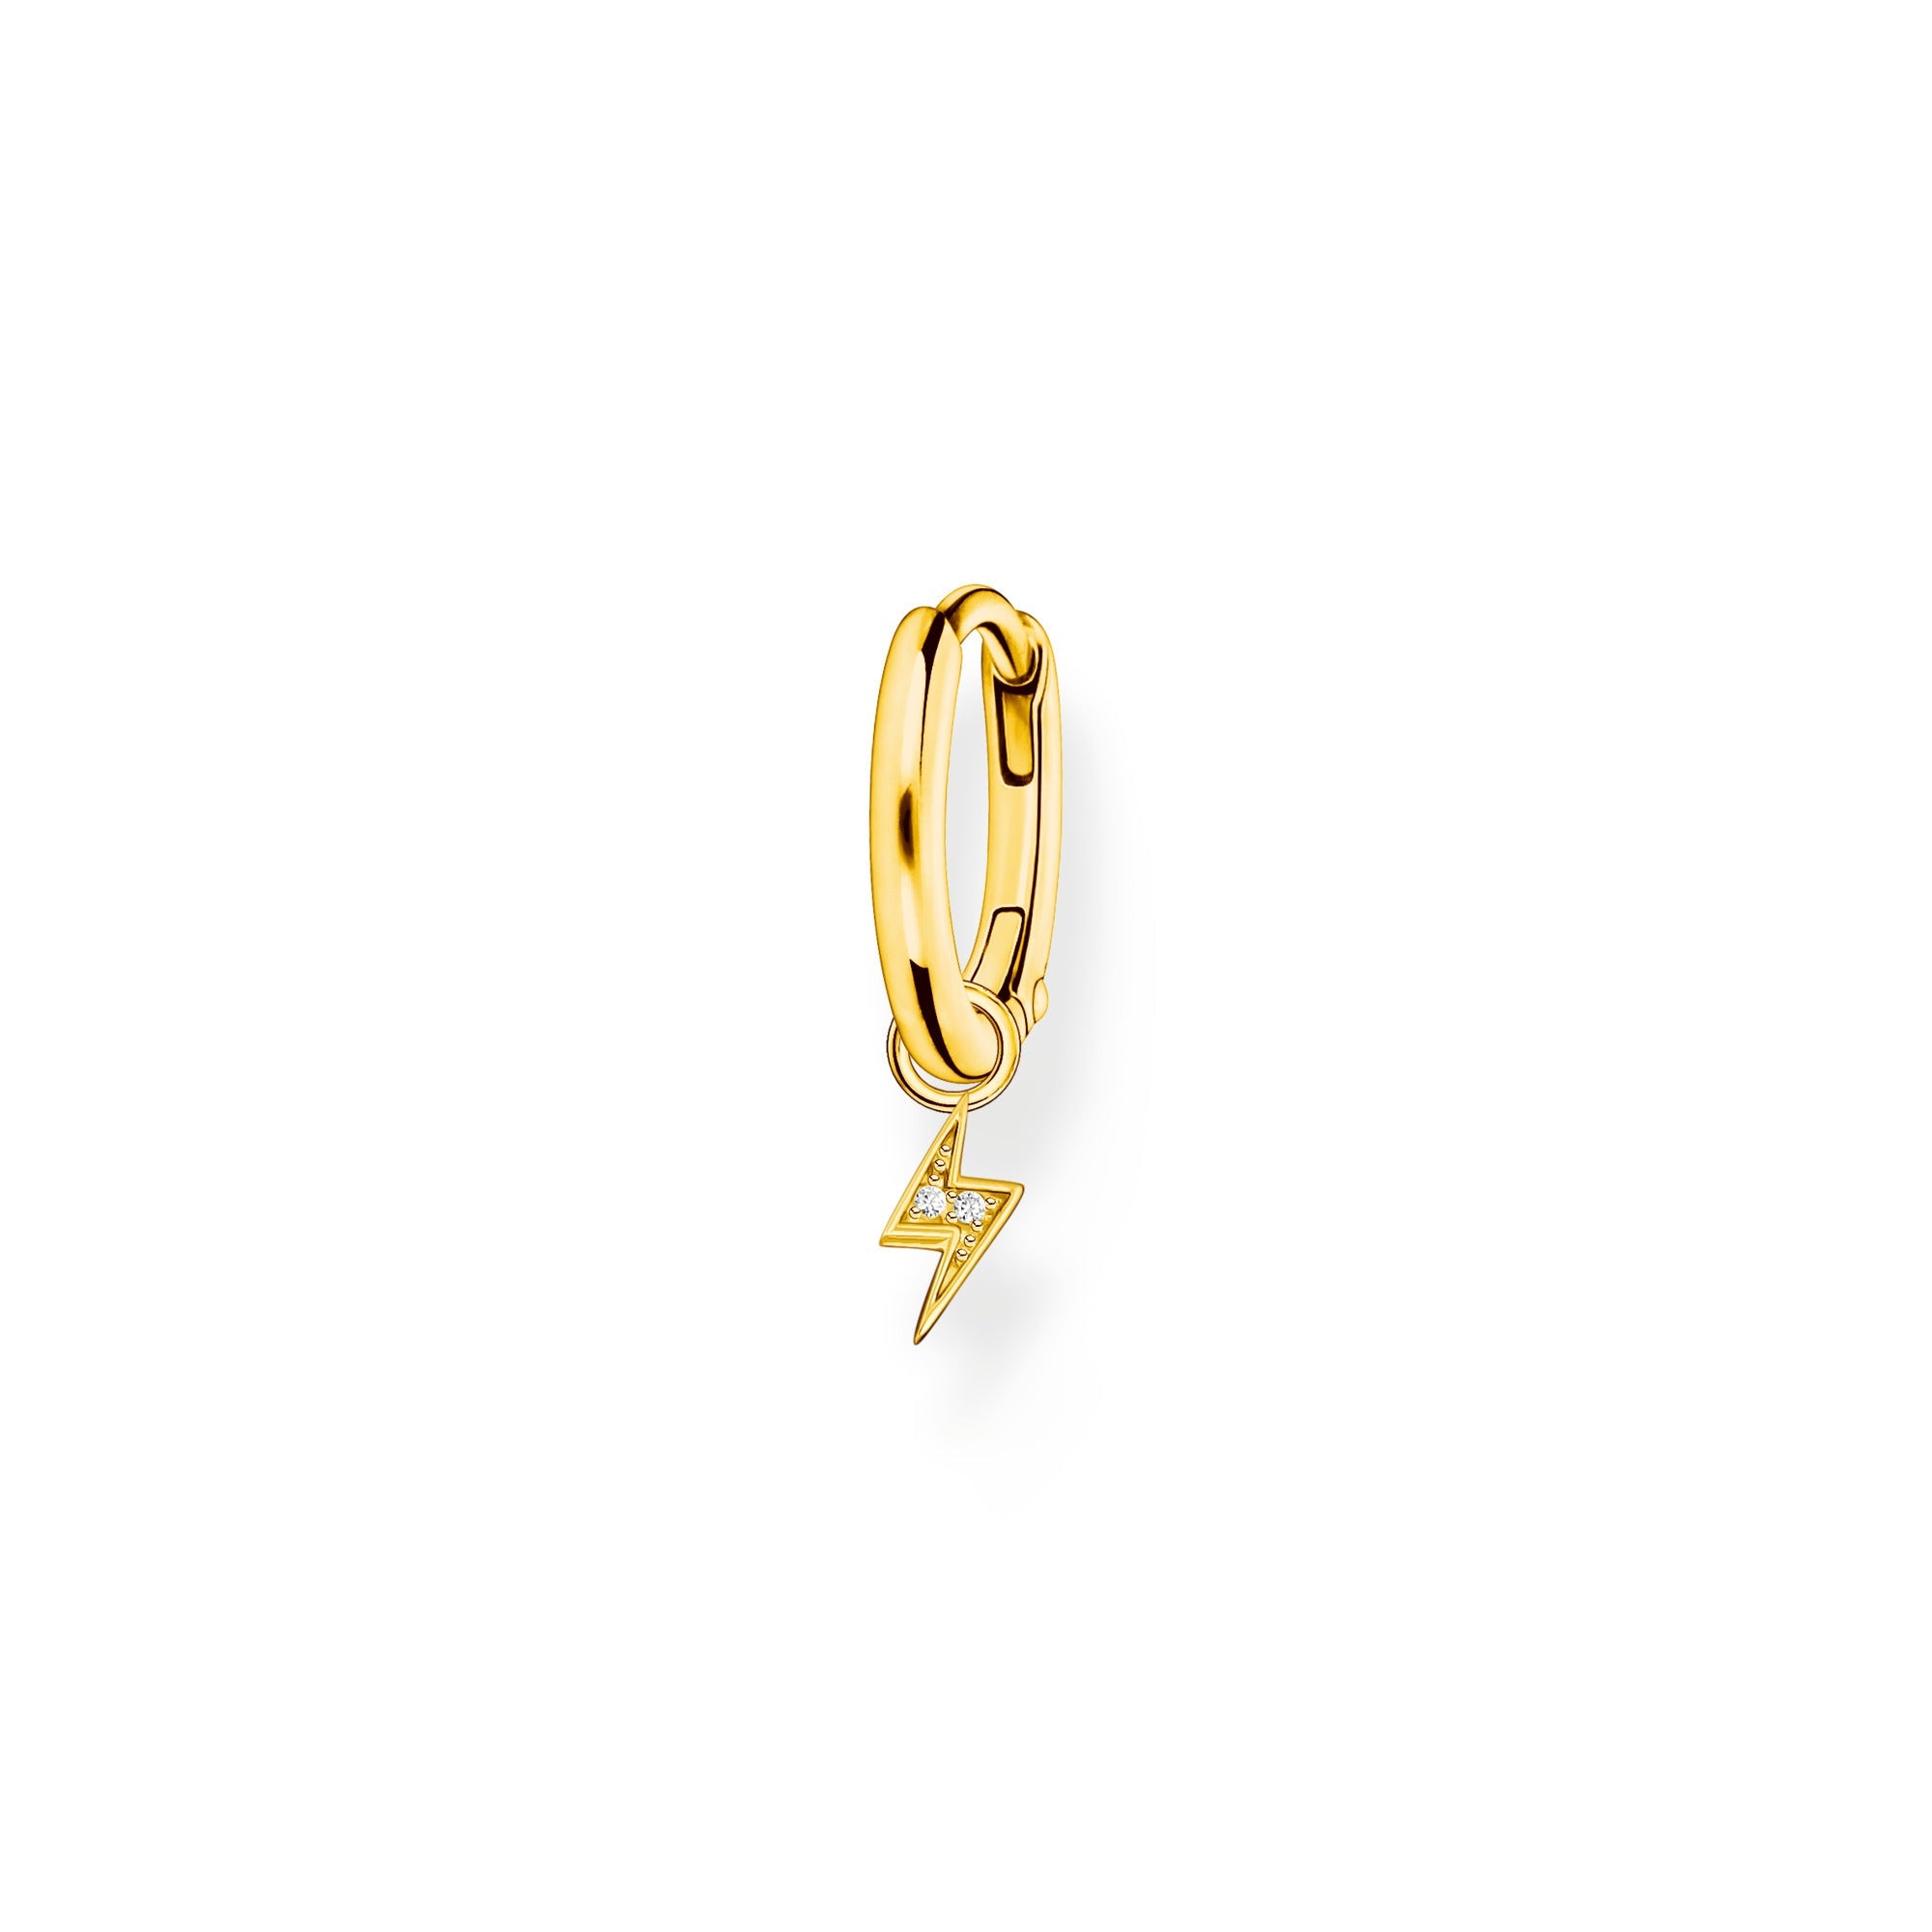 Thomas Sabo Charm Club Gold Plated Sterling Silver Flash Pendant Hoop Earring